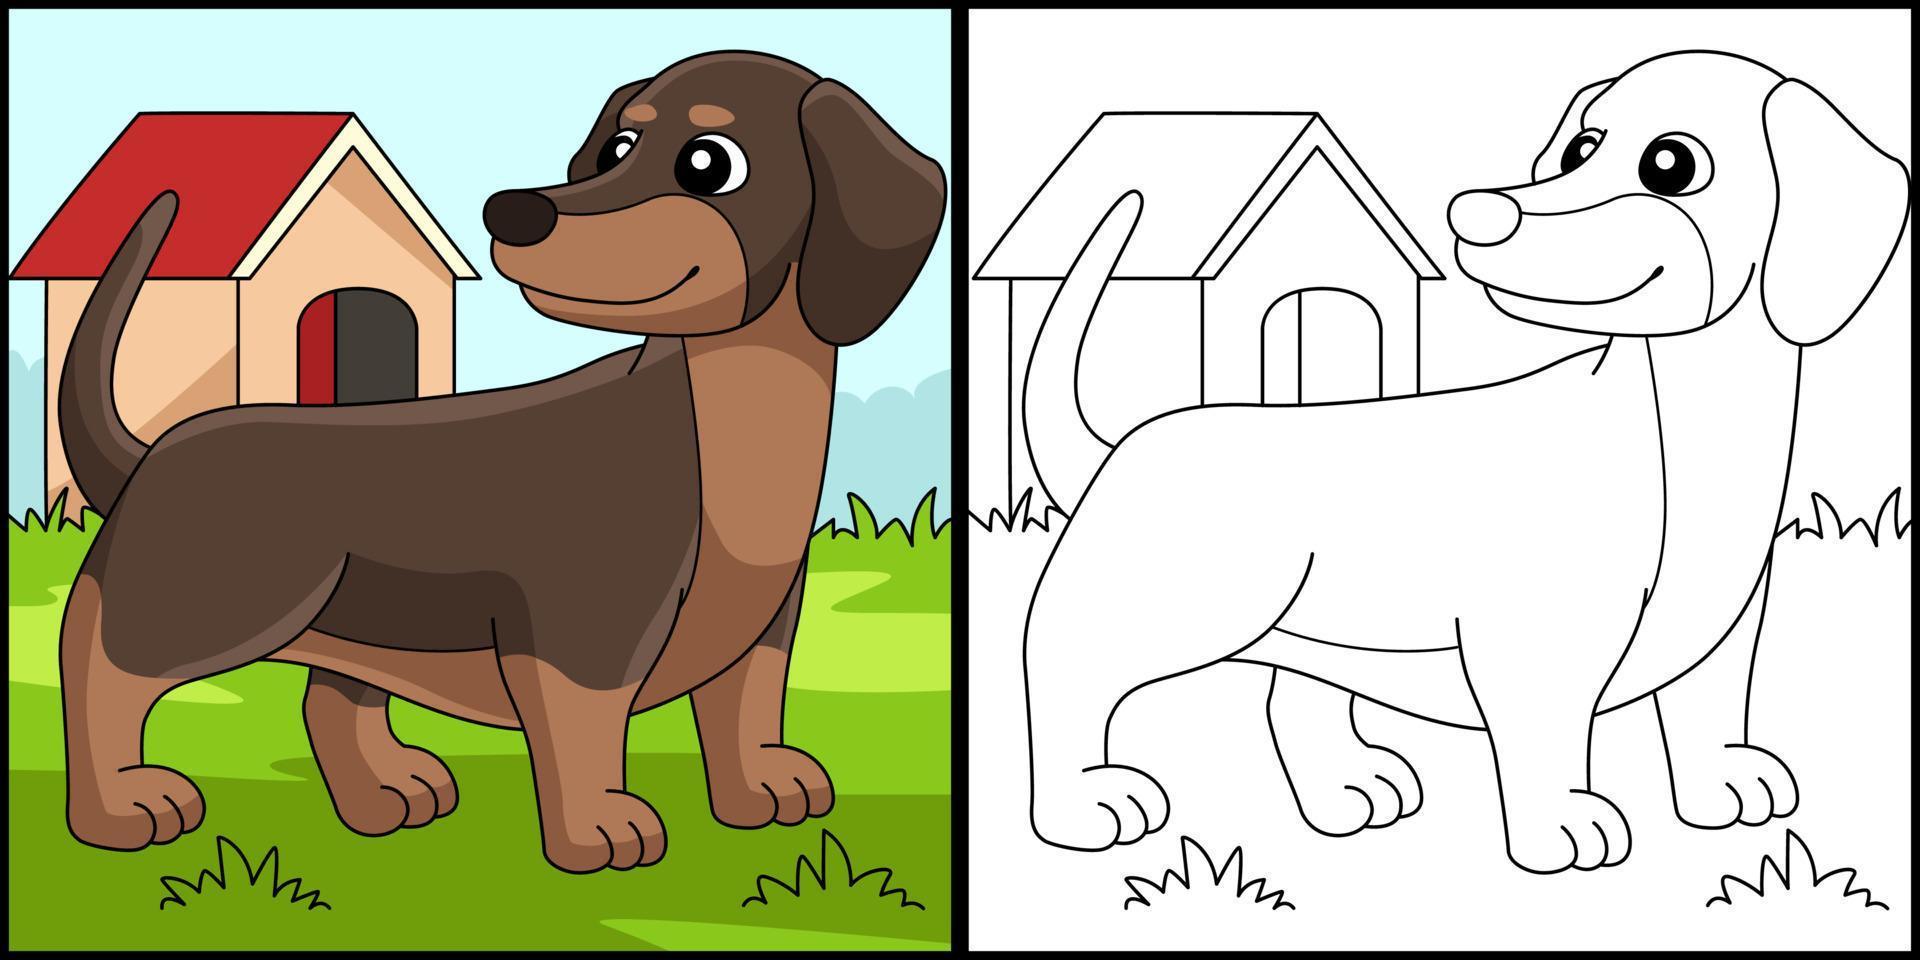 Dachshund Dog Coloring Page Colored Illustration vector